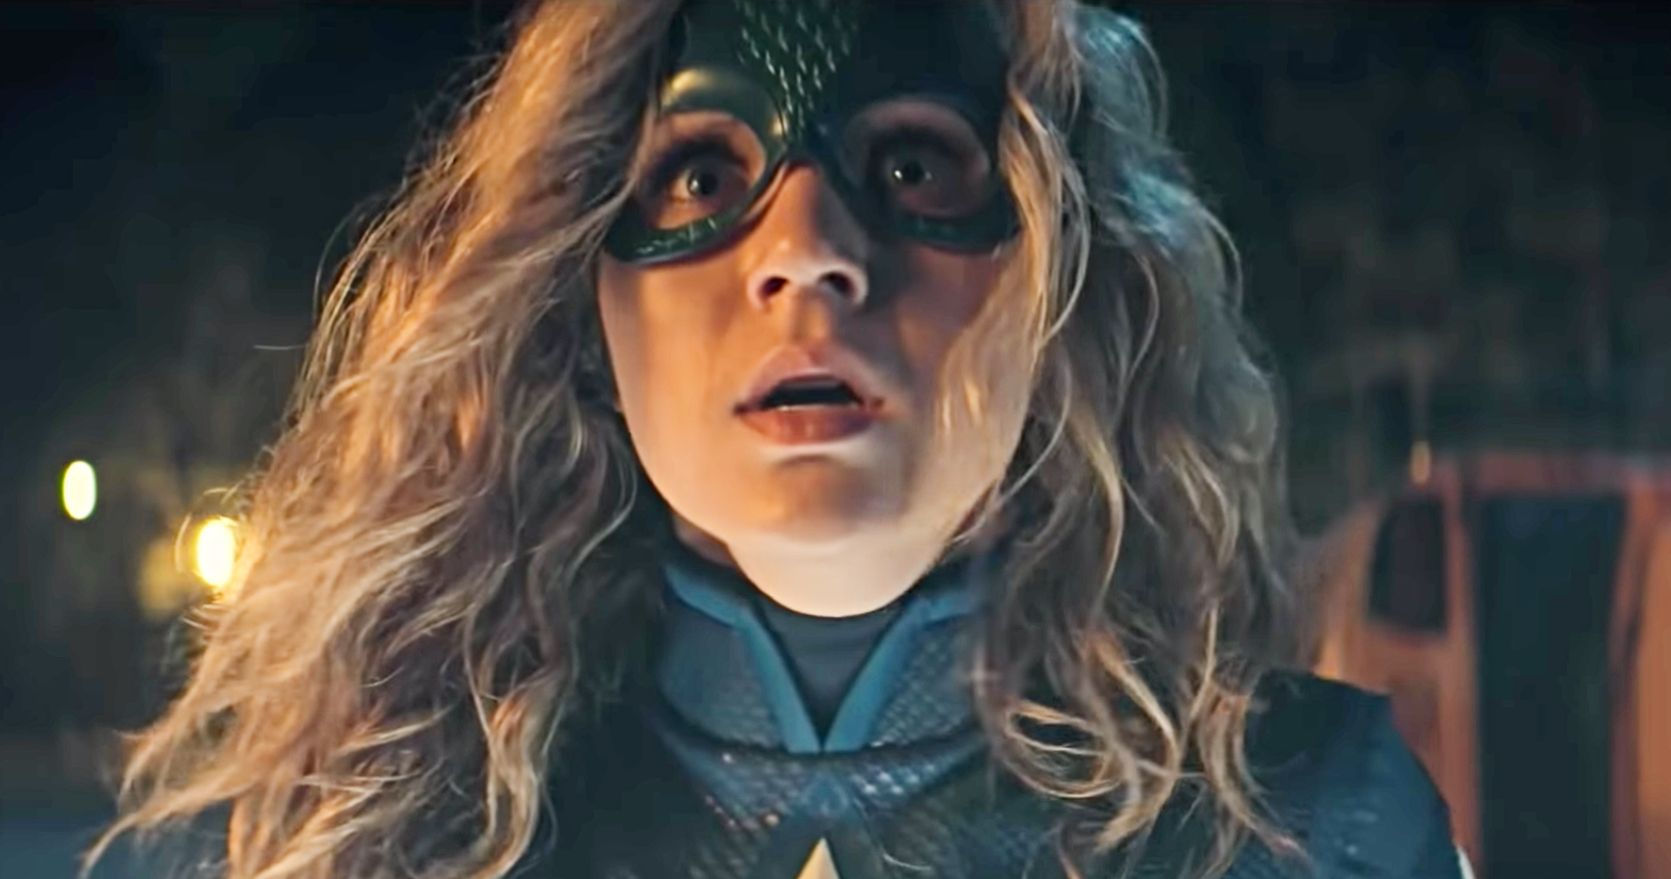 Stargirl Trailer Introduces a New DC Hero to The CW's ArrowVerse